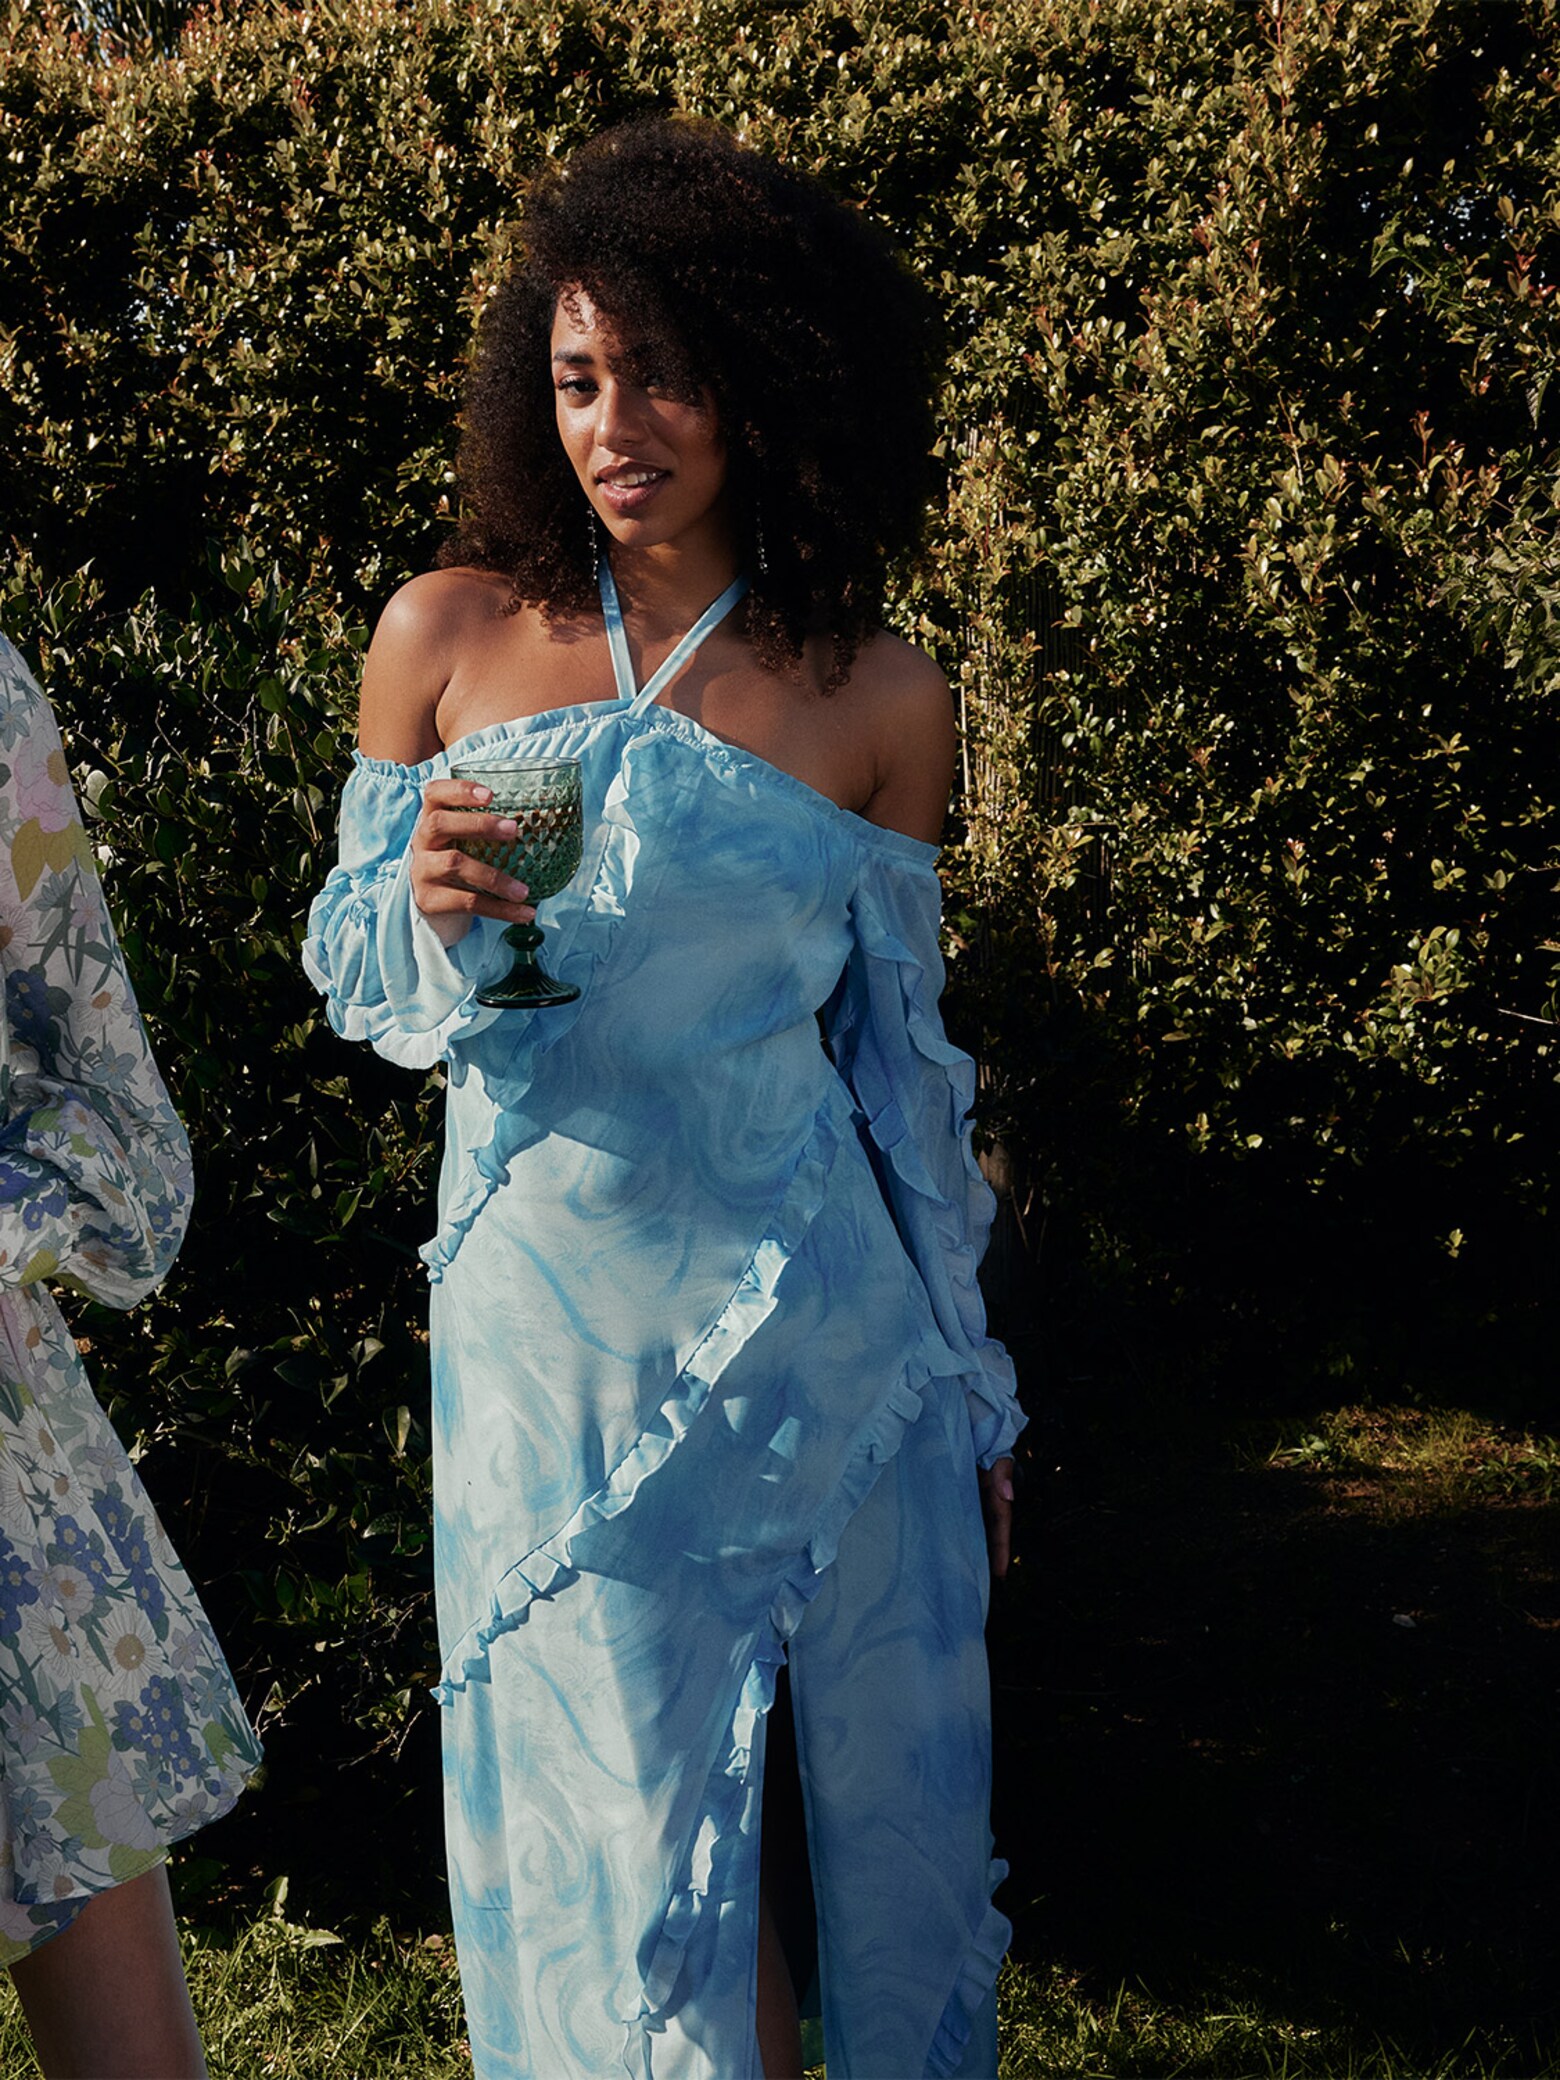 What’s your standout hue? Dreamy colorful wedding guest dresses